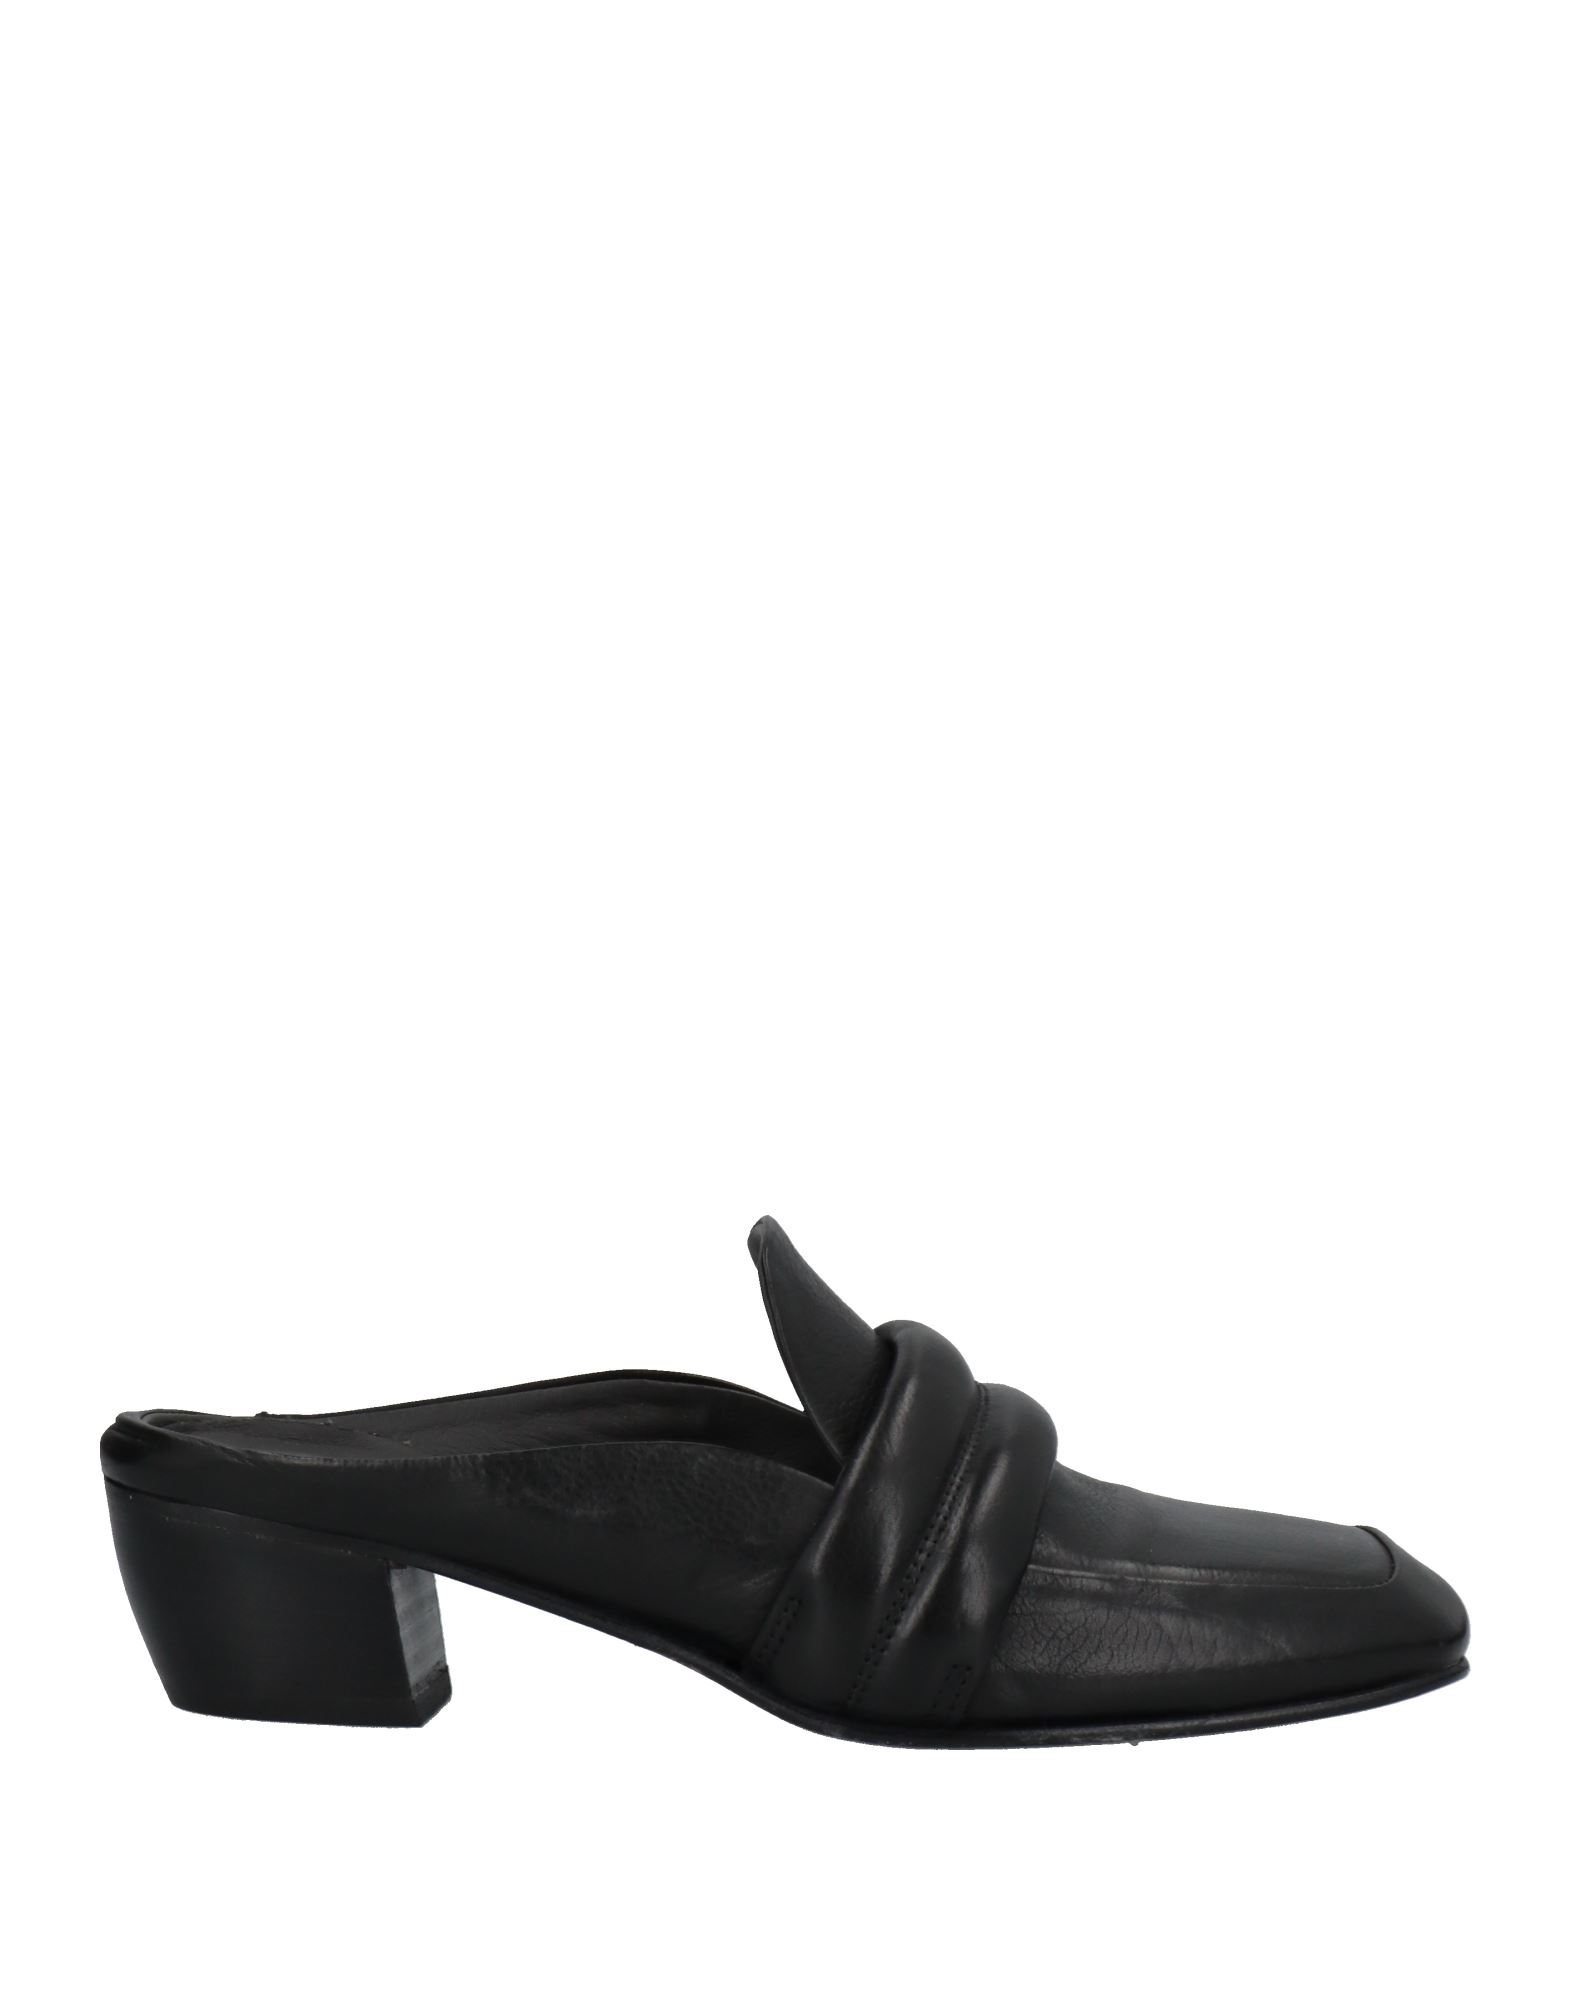 MOMA MOMA WOMAN MULES & CLOGS BLACK SIZE 10 SOFT LEATHER